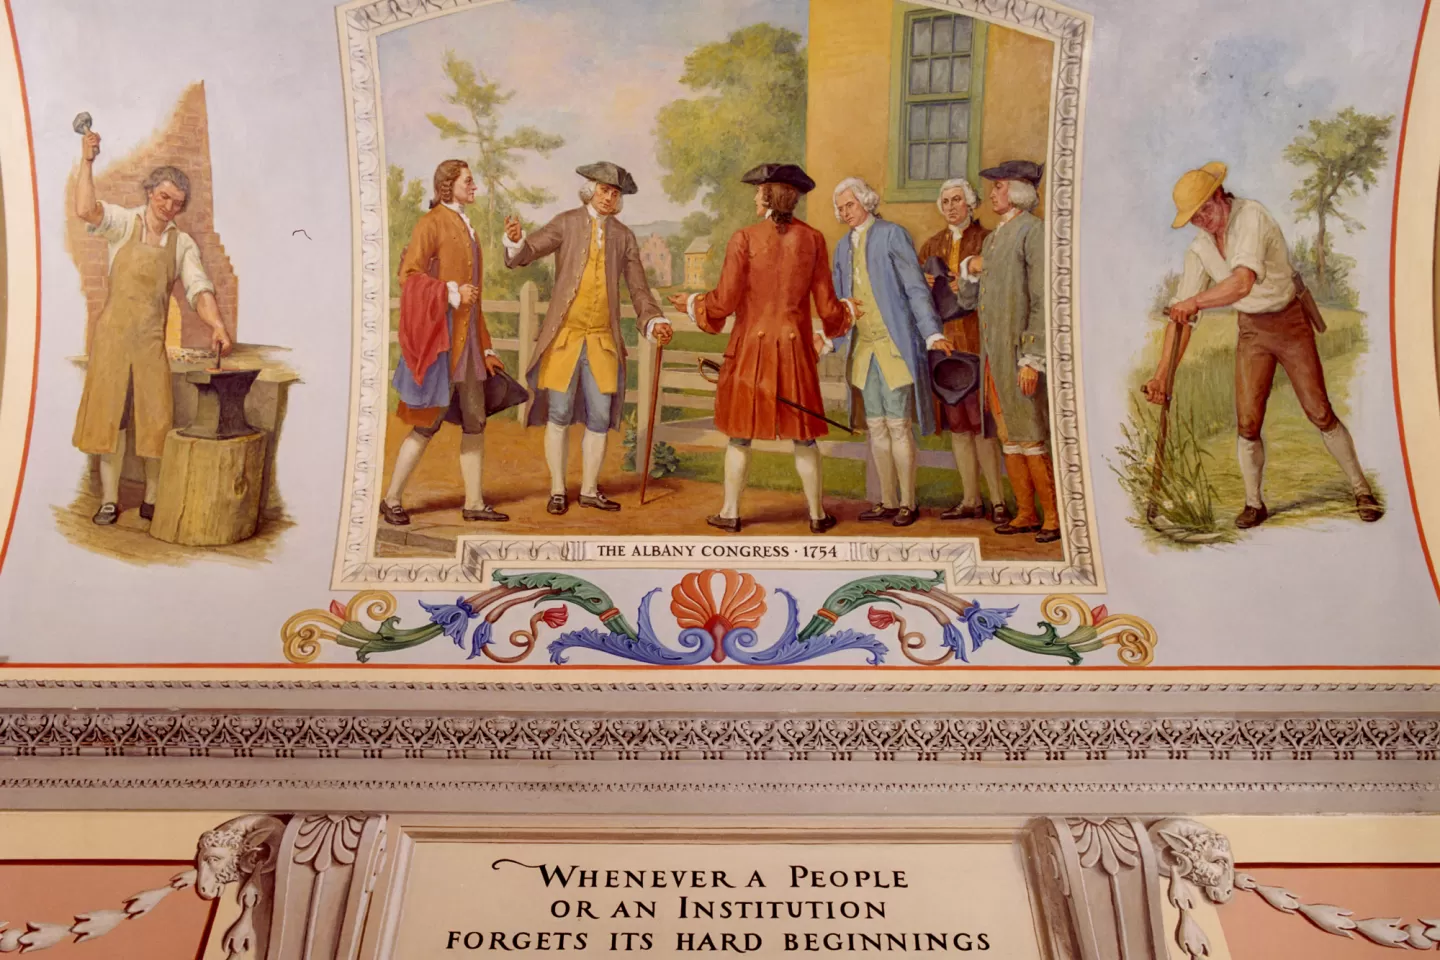 "The Albany Congress, 1754" by Allyn Cox